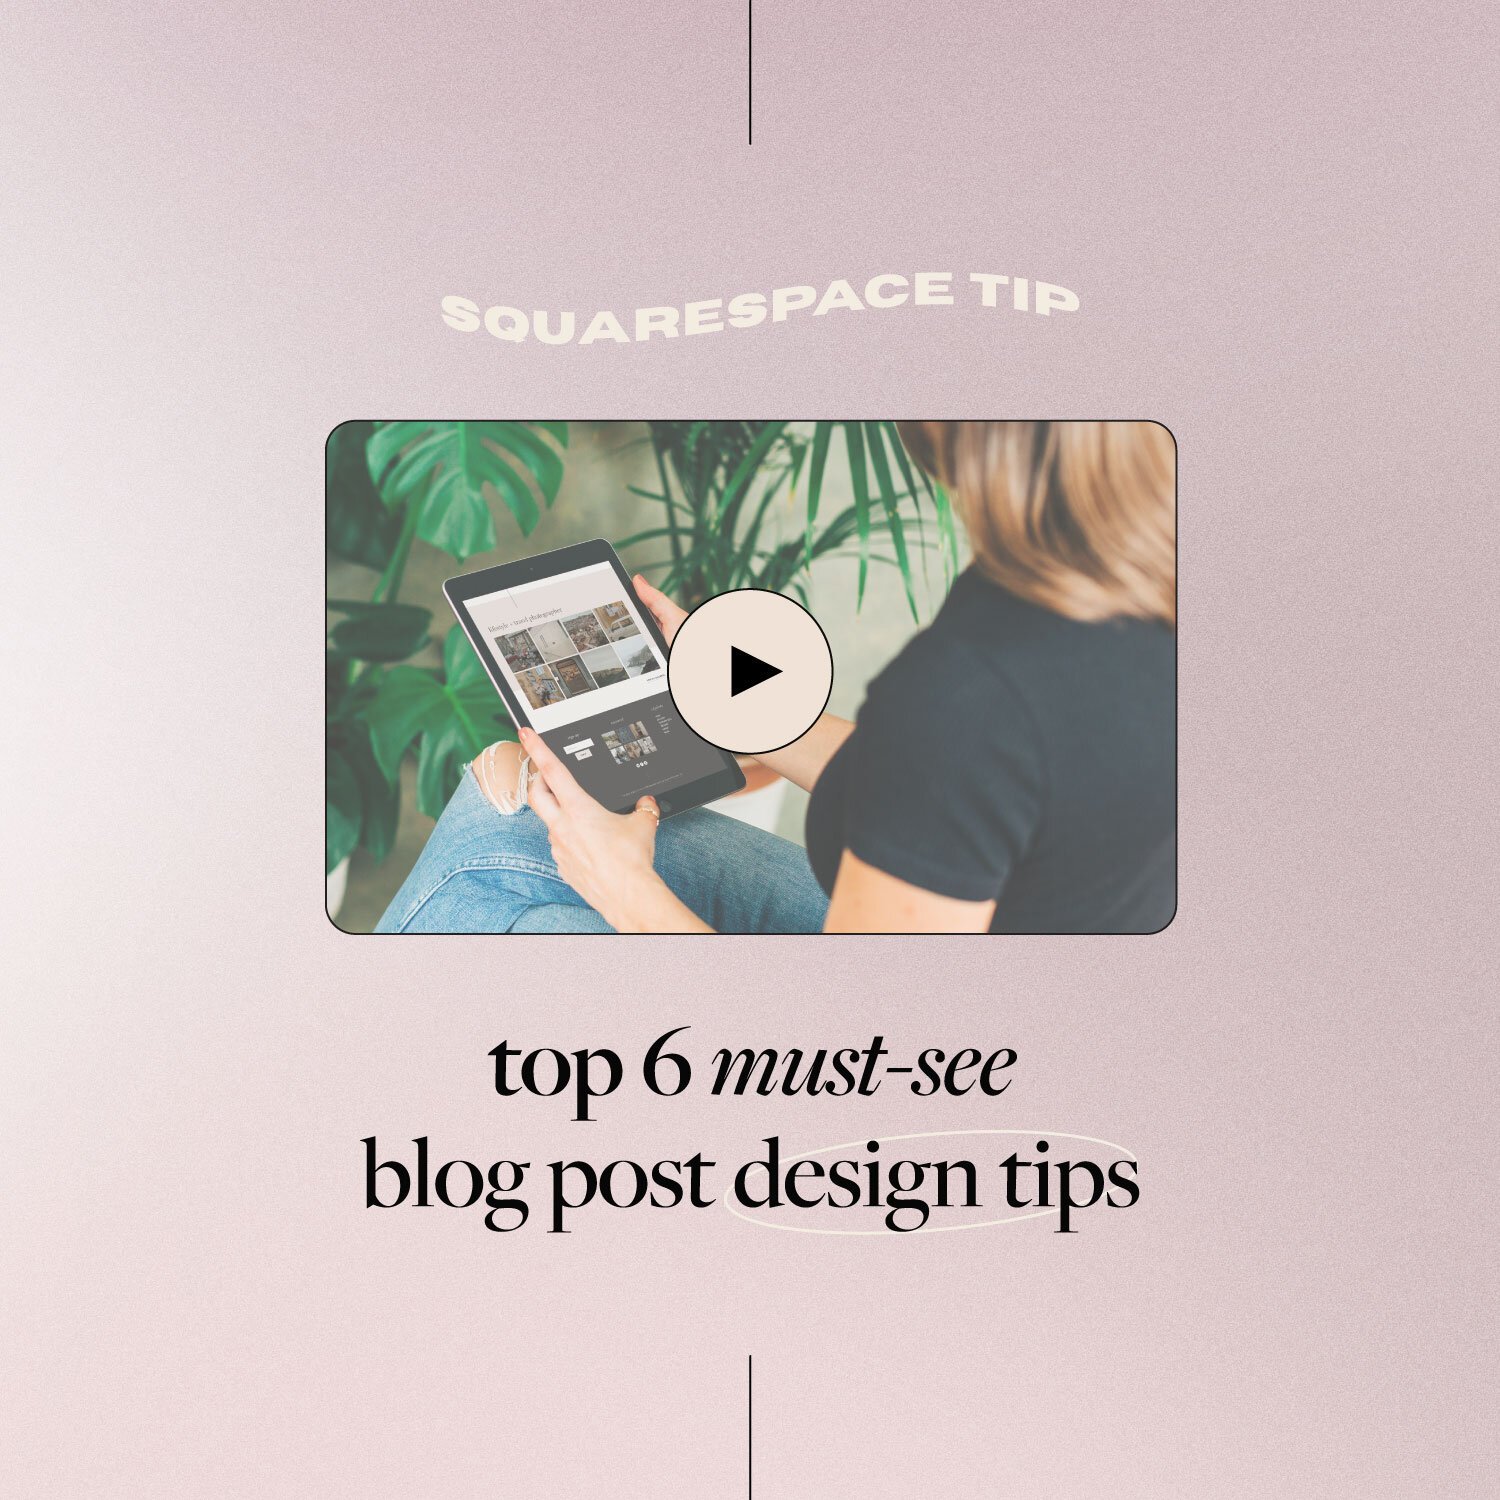 How To Make A Blog On Squarespace